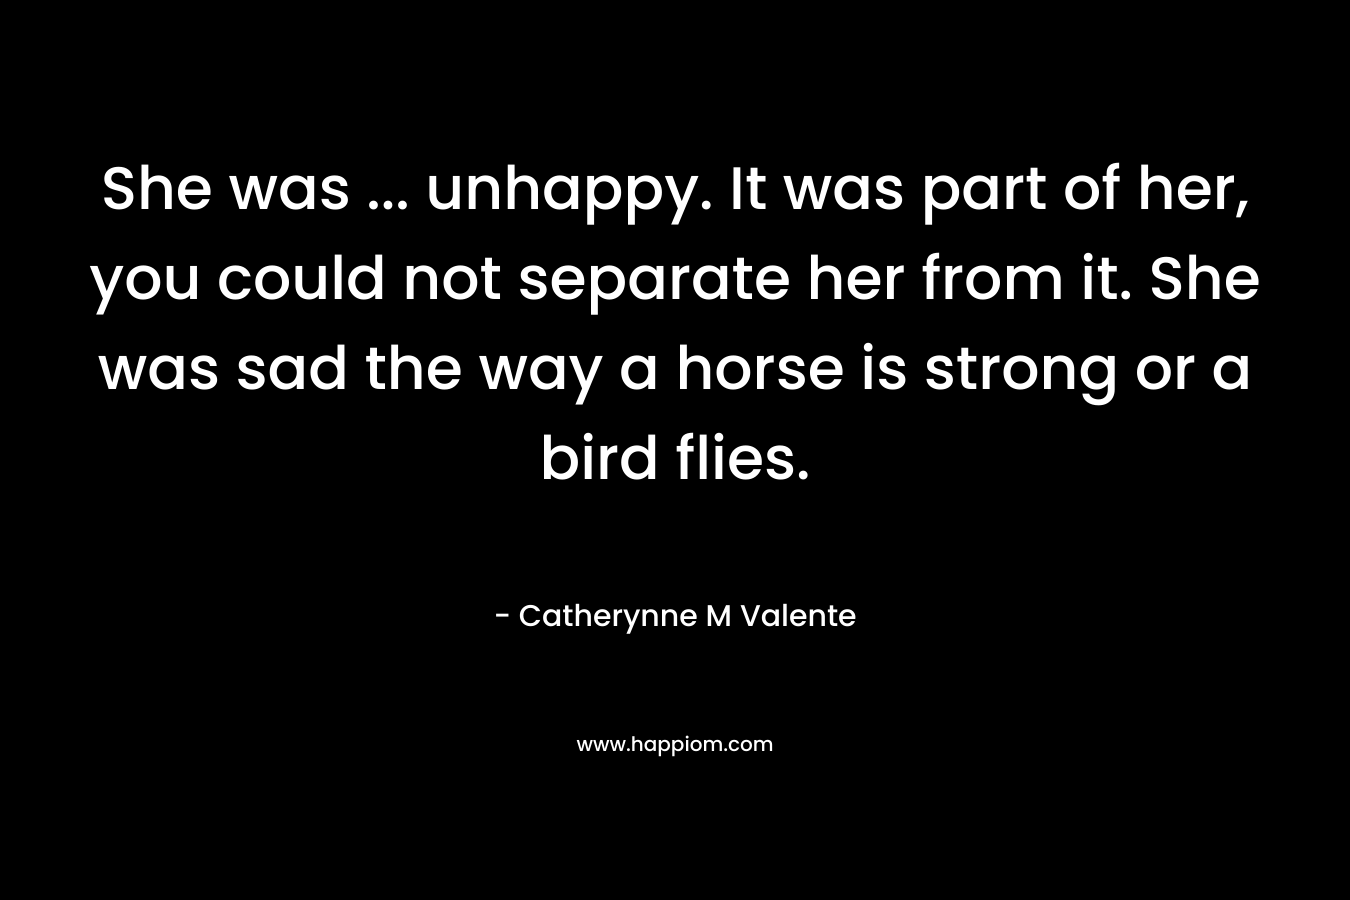 She was … unhappy. It was part of her, you could not separate her from it. She was sad the way a horse is strong or a bird flies. – Catherynne M Valente